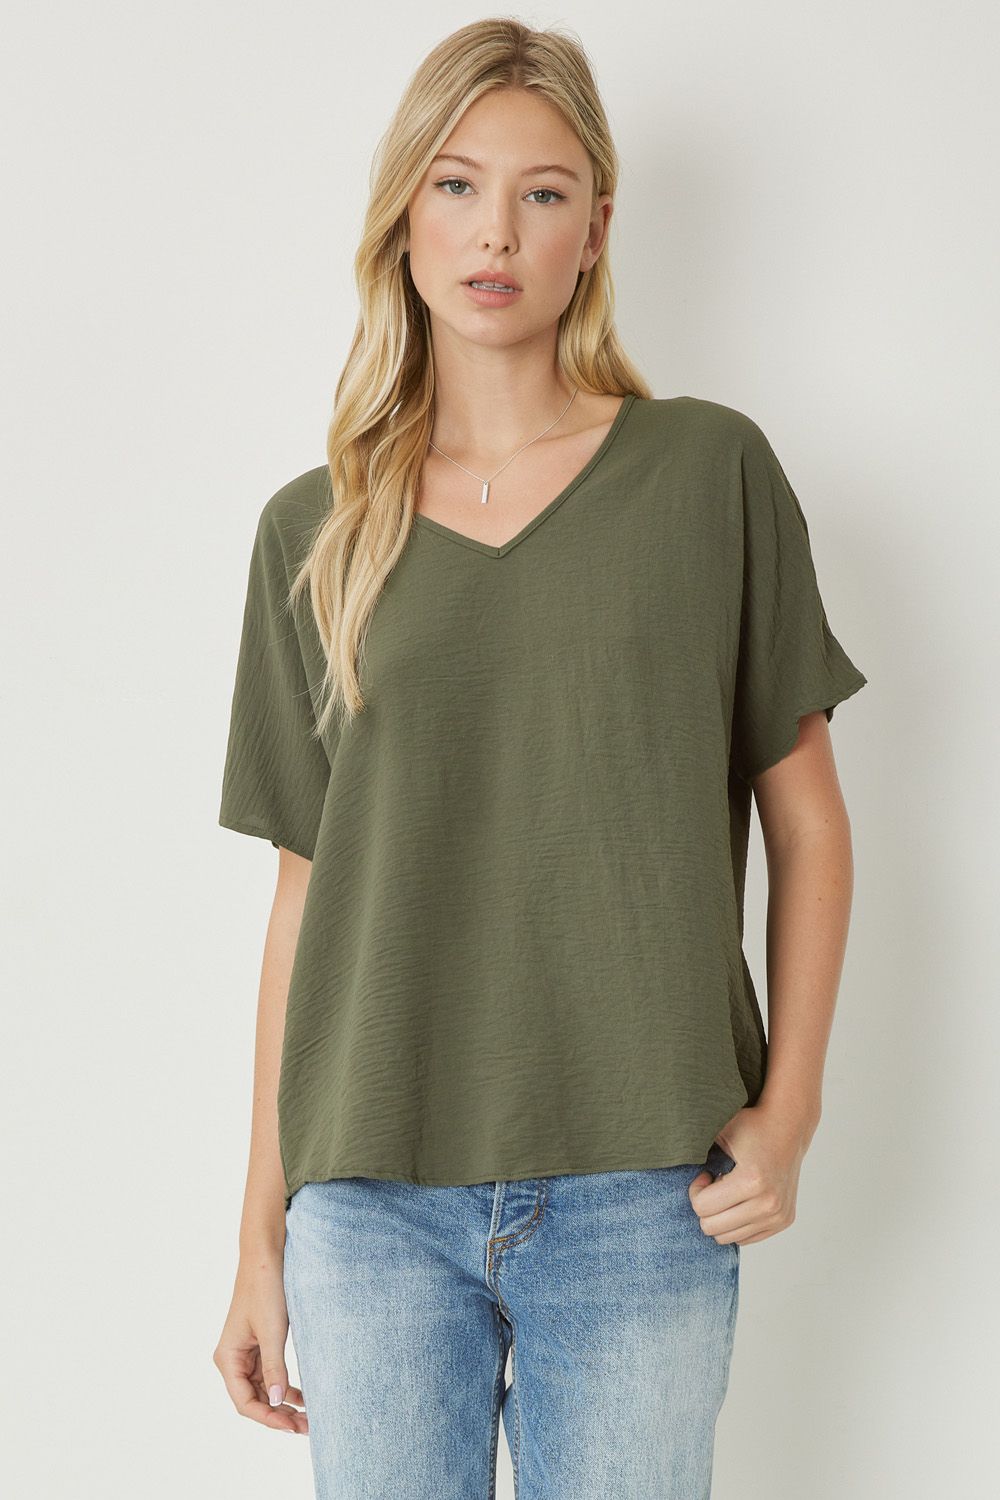 Thea Essential V-Neck Short Sleeve Woven Blouse - Olive Green